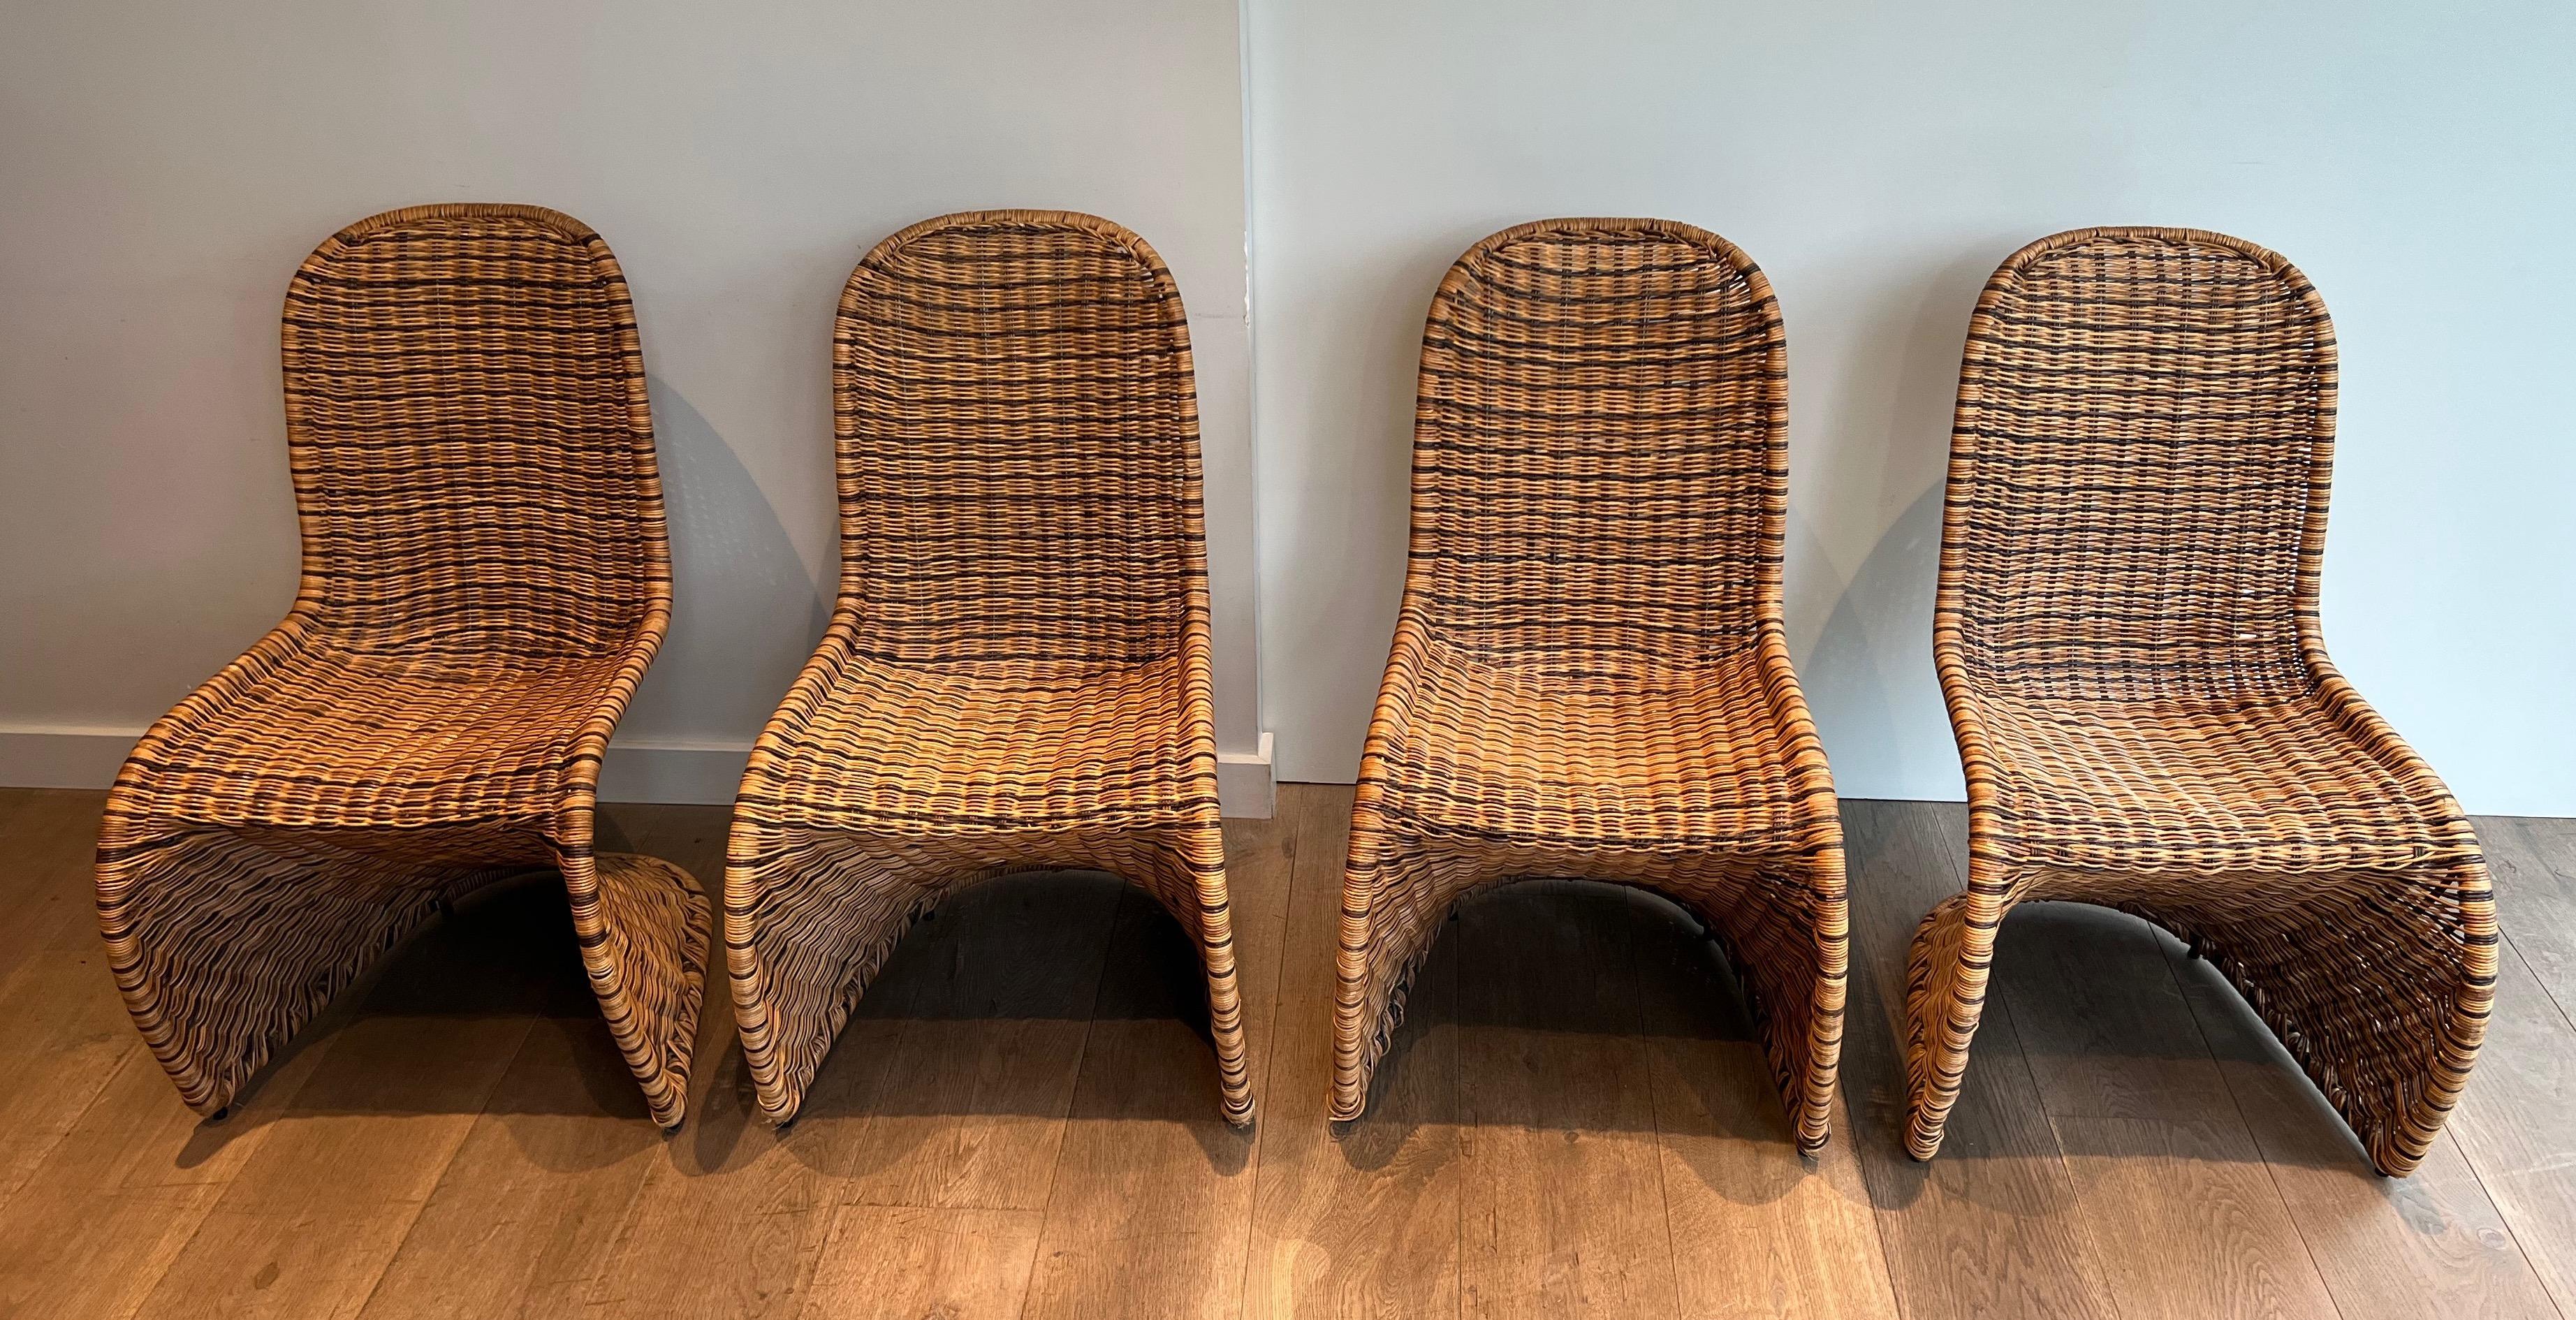 This very nice and design curved chairs are made of rattan chairs. This is a French work. Circa 1970